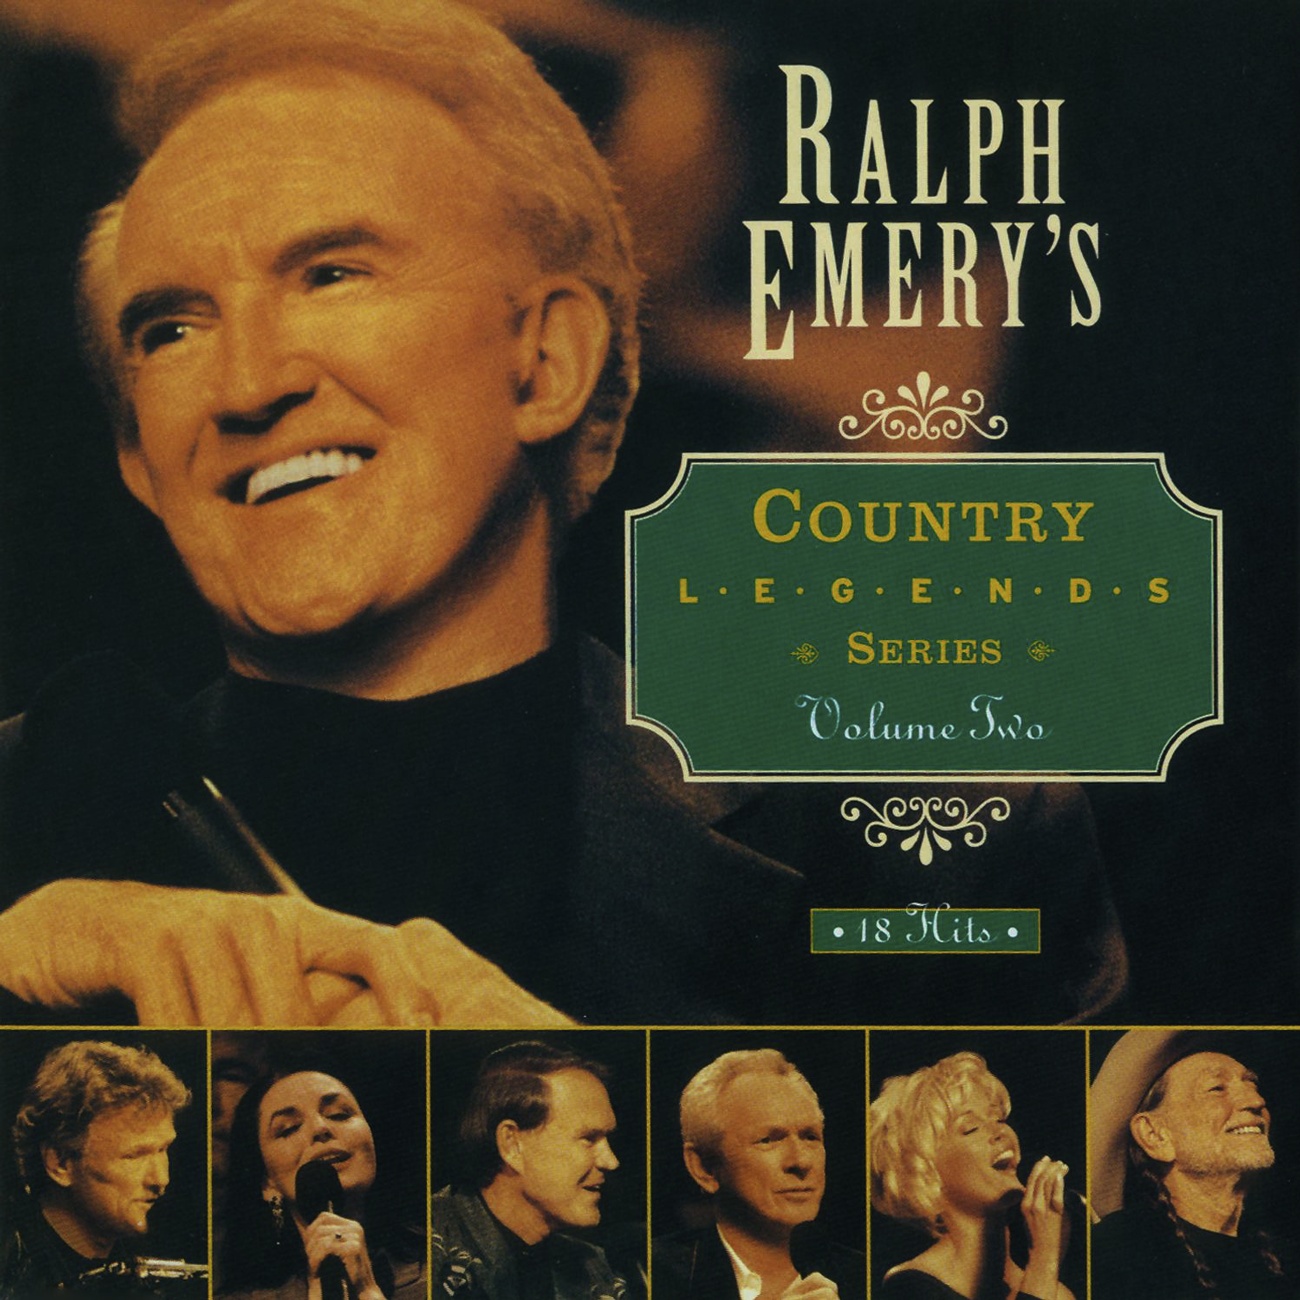 But Love Me (Ralph Emery's Country Legends Homecoming Vol 2 album version)